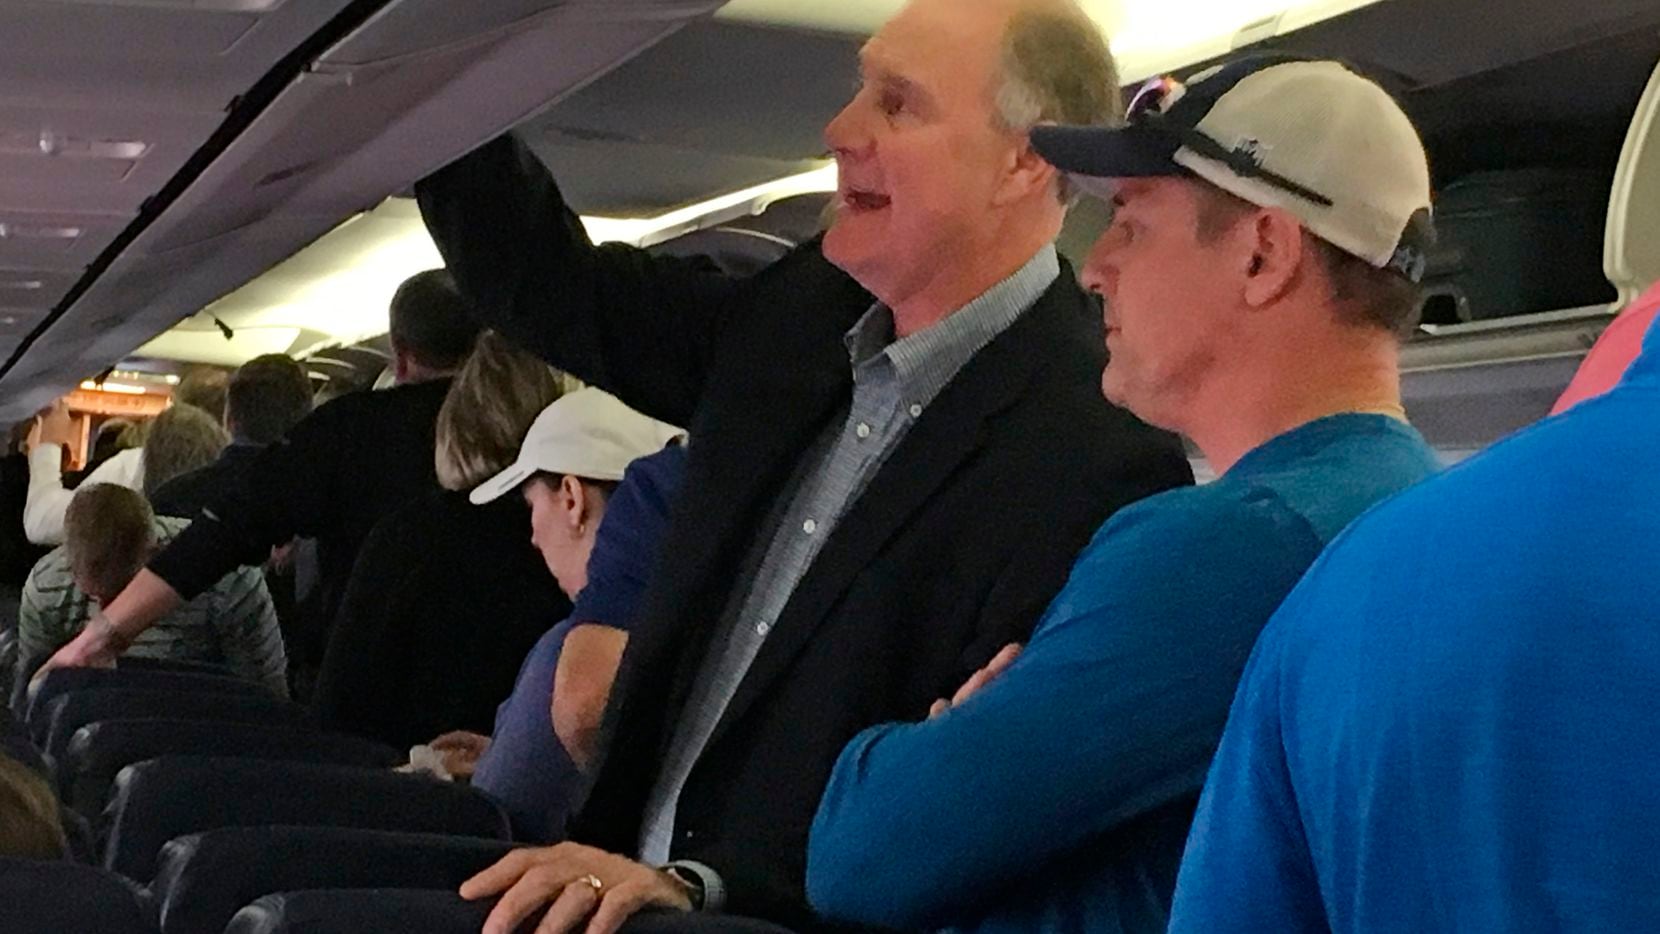 Southwest Airlines CEO Gary Kelly retrieves his bags from the overhead compartment after...